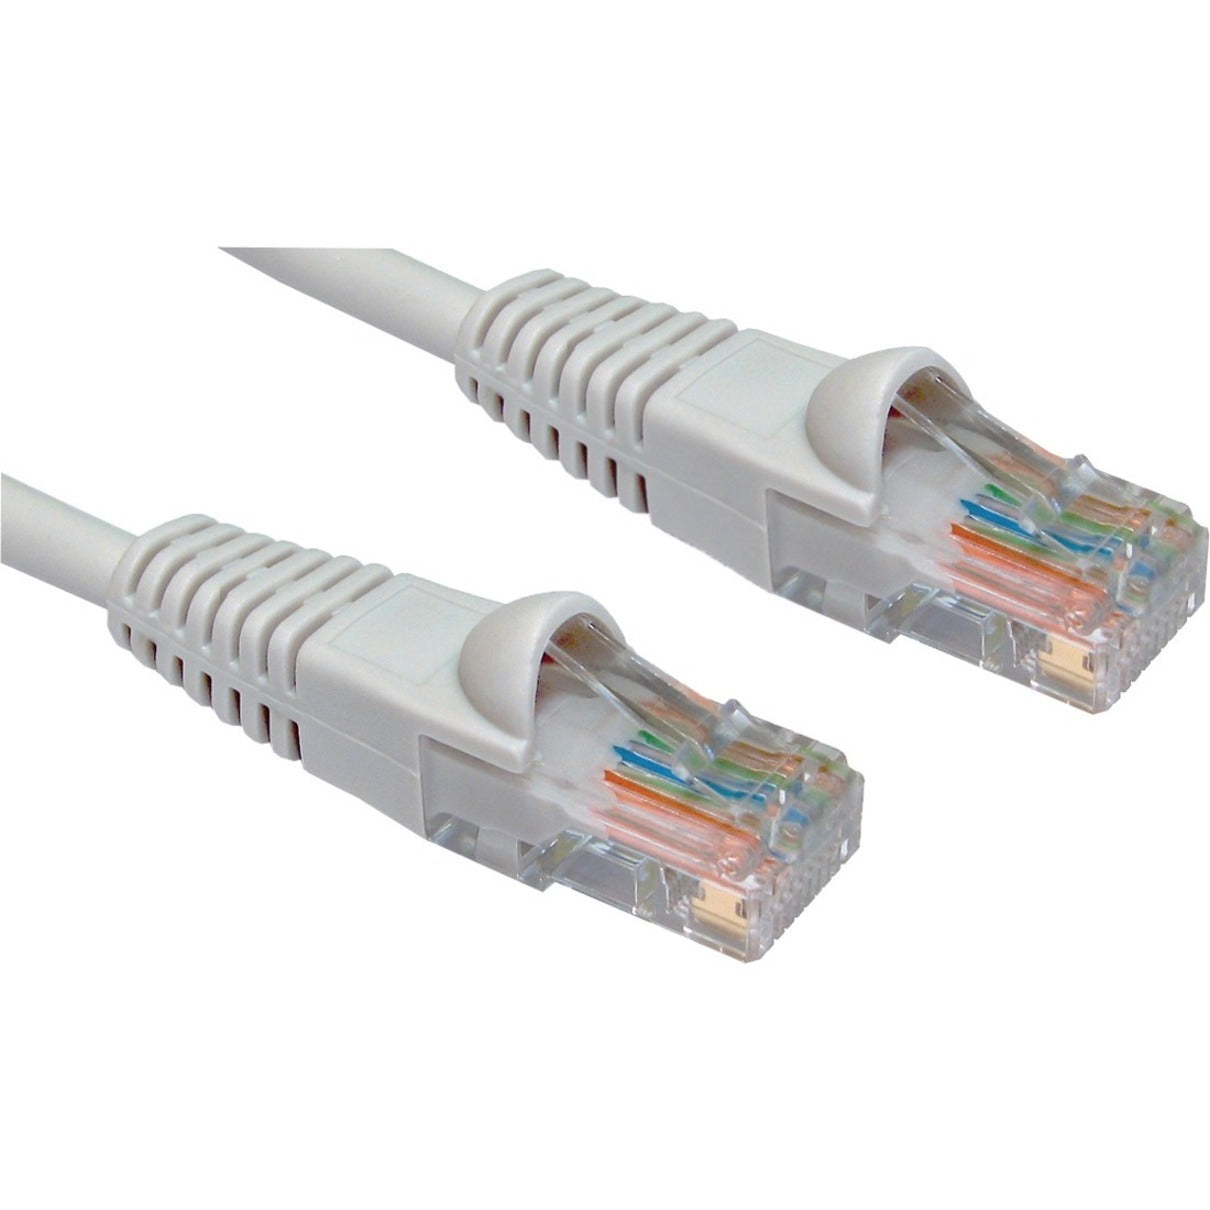 W Box 0E-C6GY16 1ft. CAT6 Patch Cable, Gray - 6 Pack